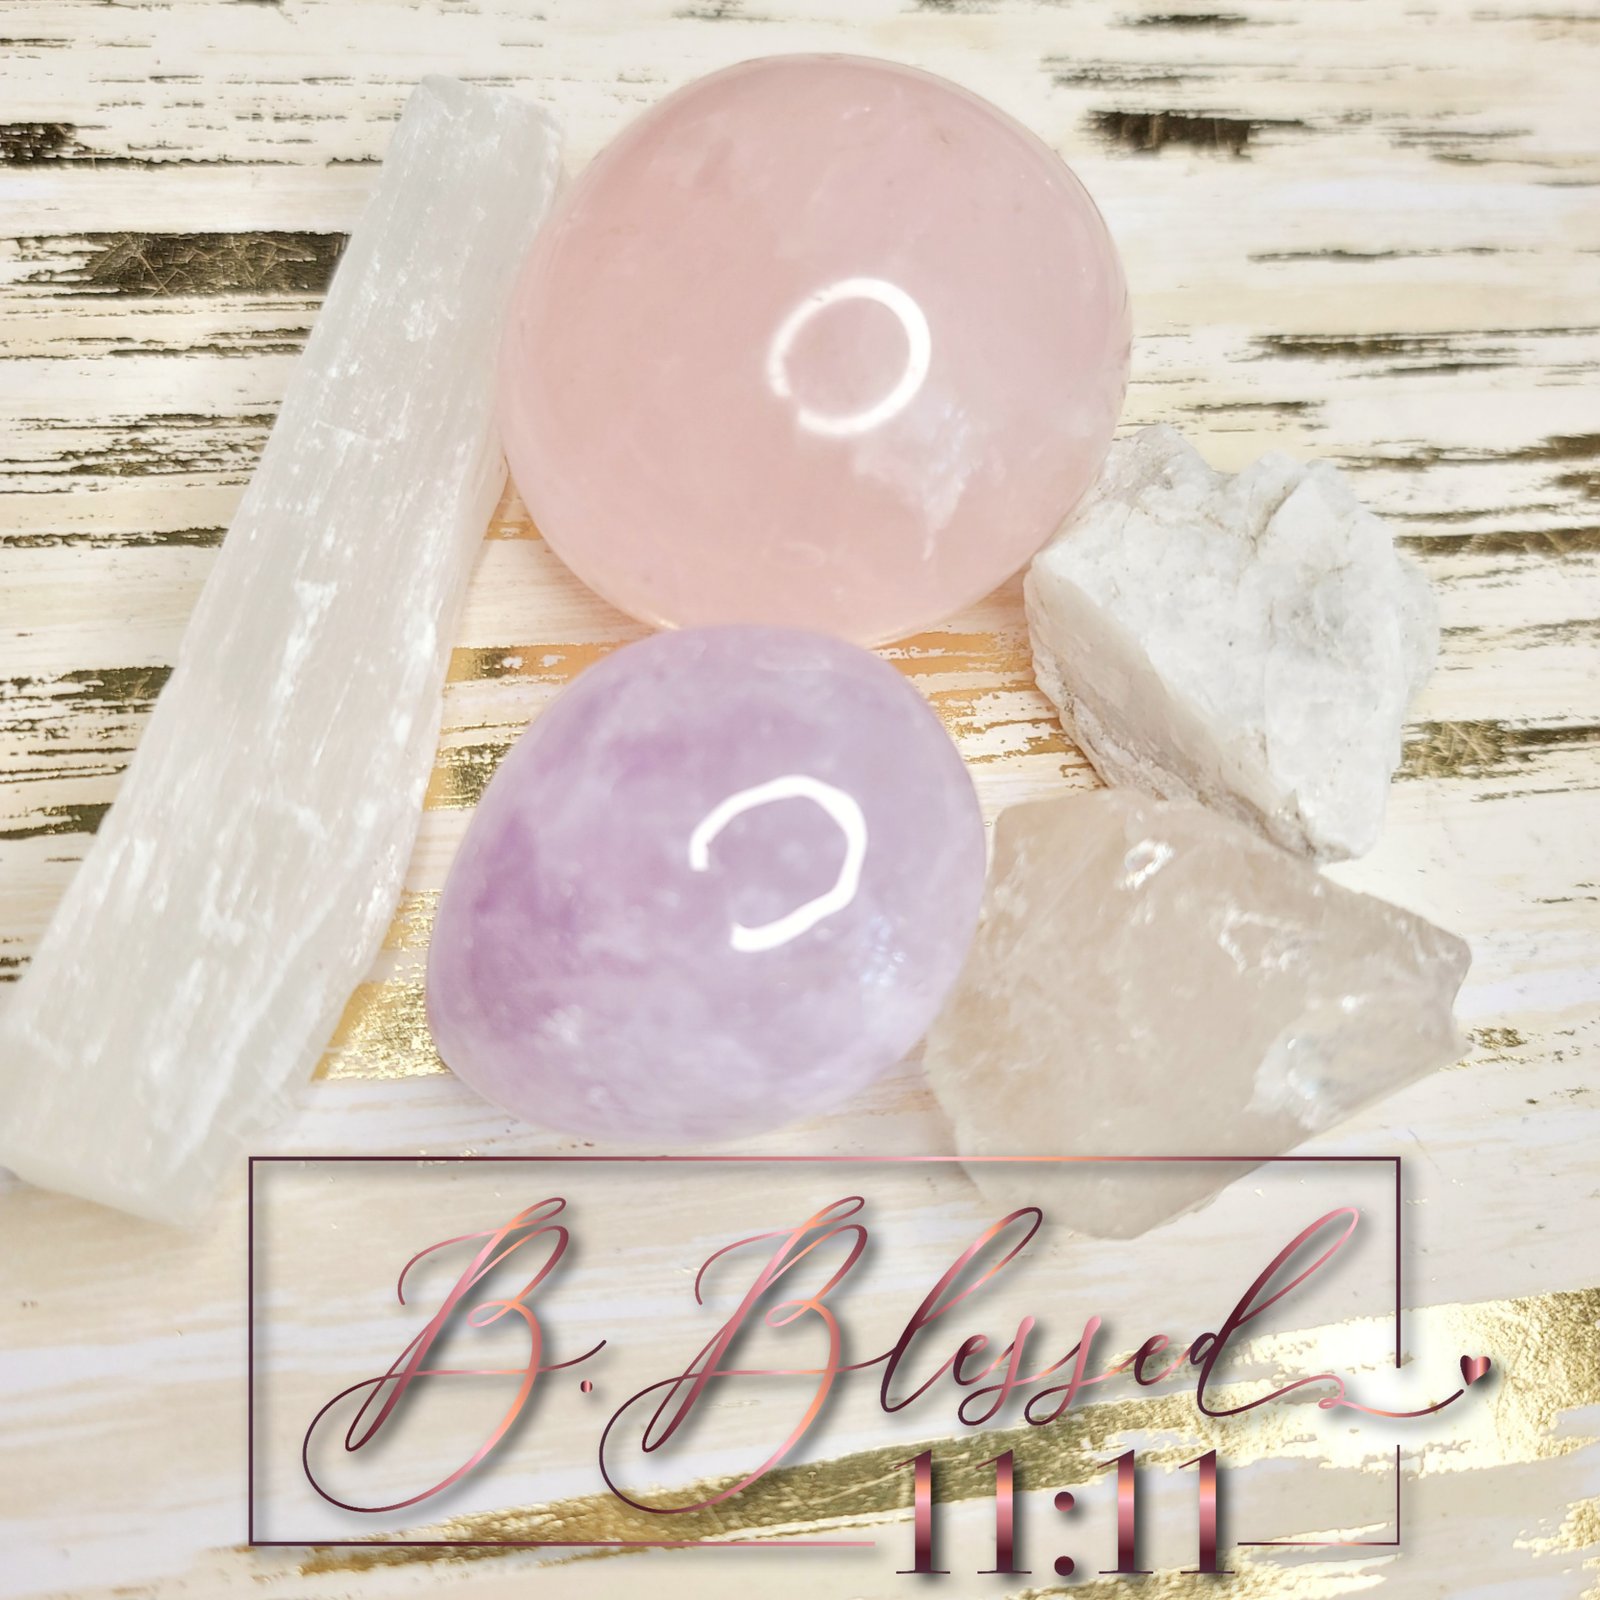 Happy Marriage and Love Bundle 14pc Quality Handpicked Healing Crystals Honesty 